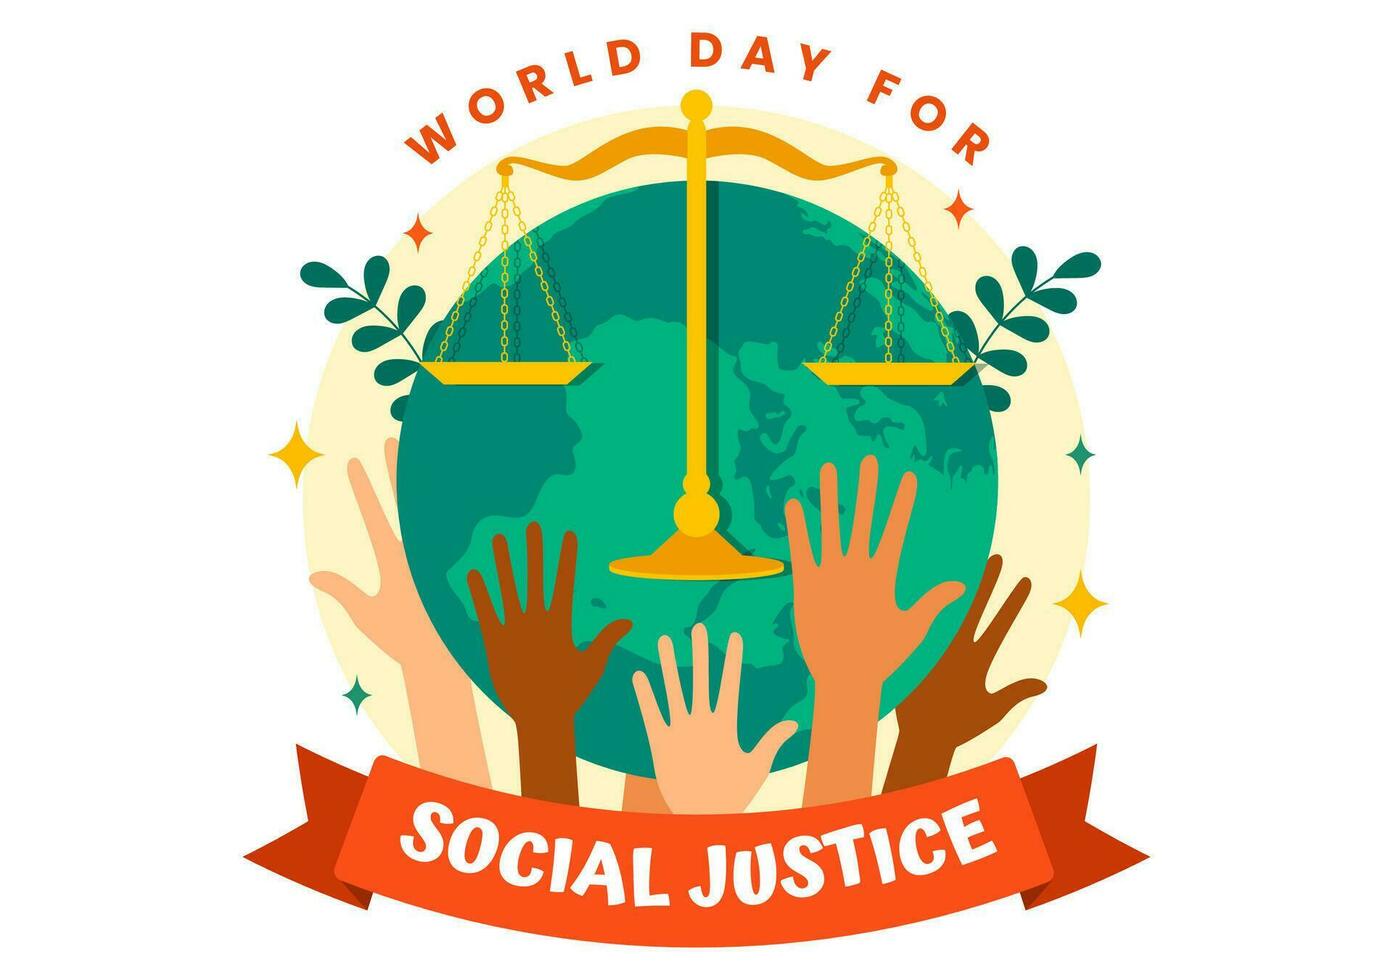 World Day of Social Justice Vector Illustration on February 20 with Scales or Hammer for a Just Relationship and Injustice Protection in Background